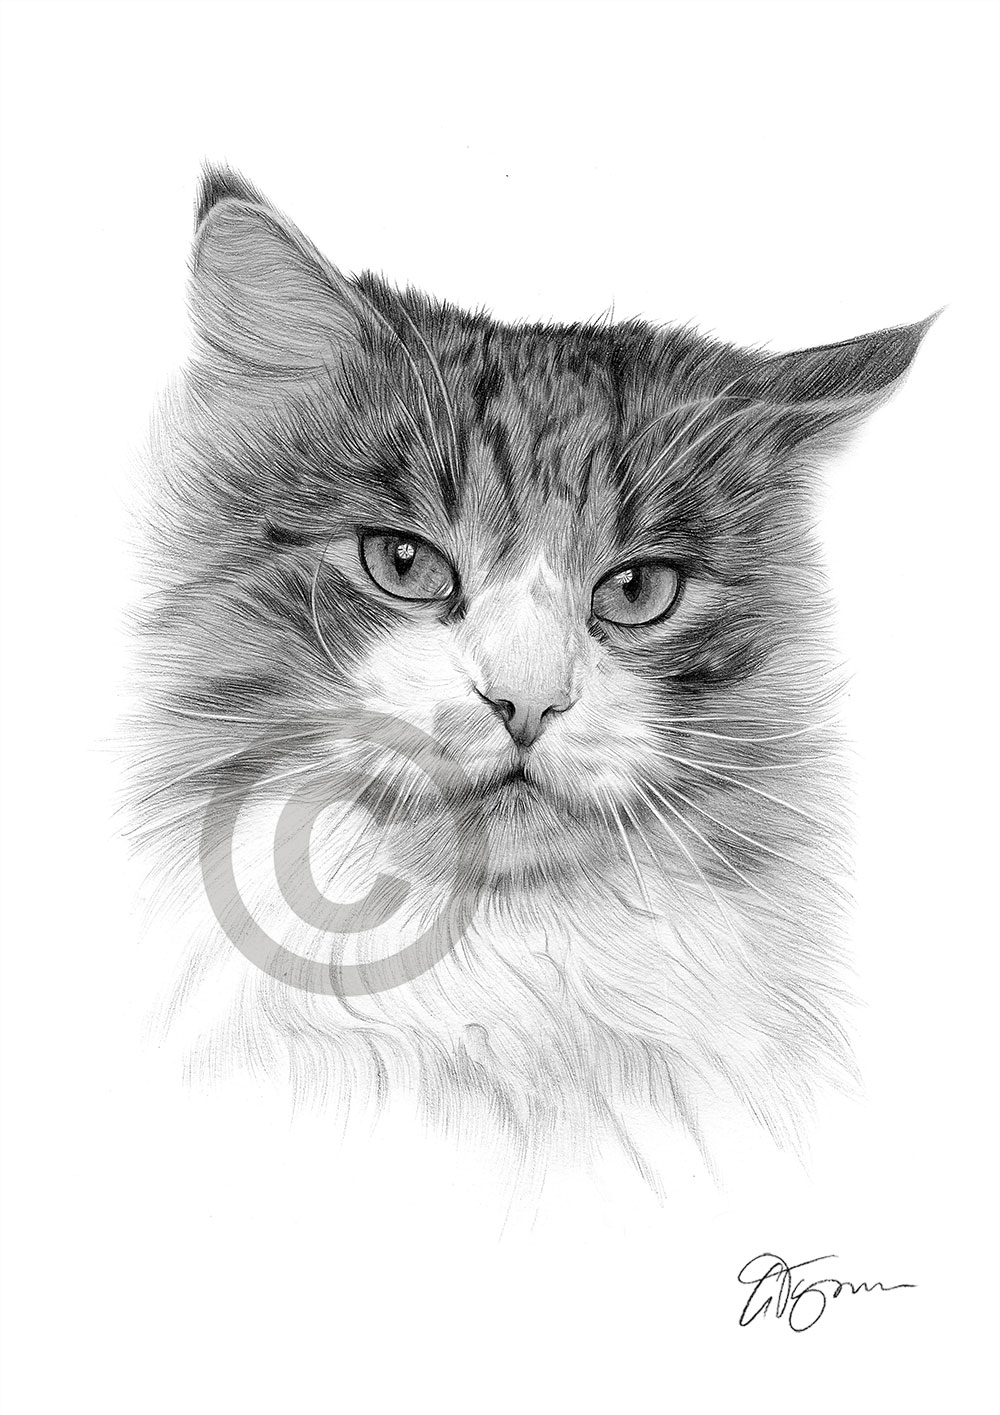 Pencil drawing of a domestic cat by artist Gary Tymon